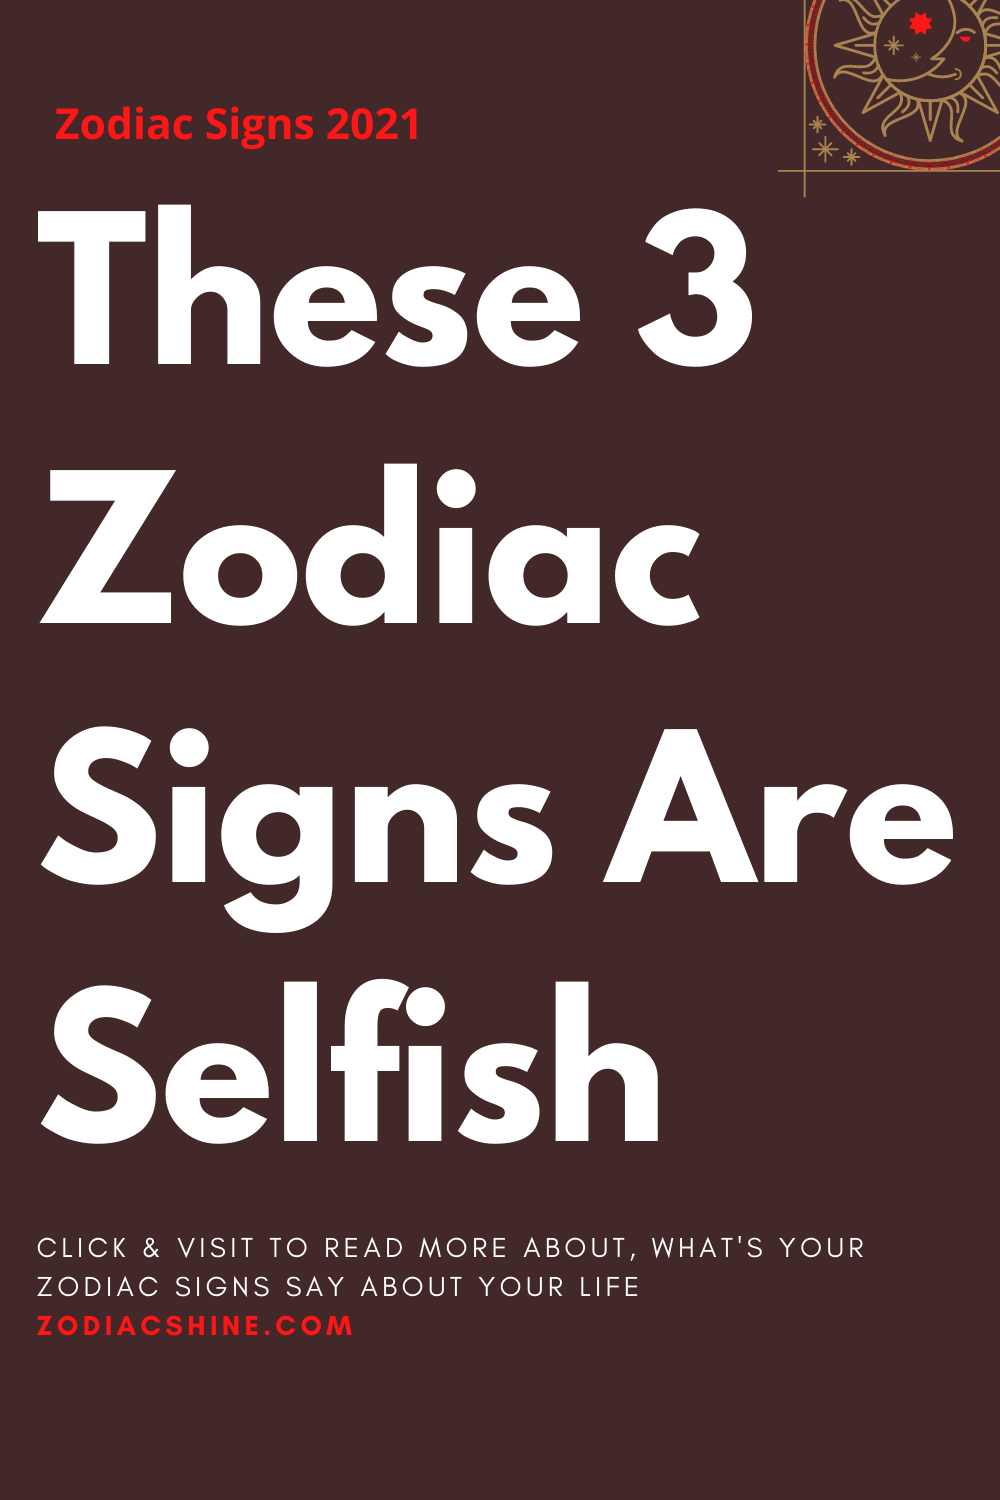 These 3 Zodiac Signs Are Selfish